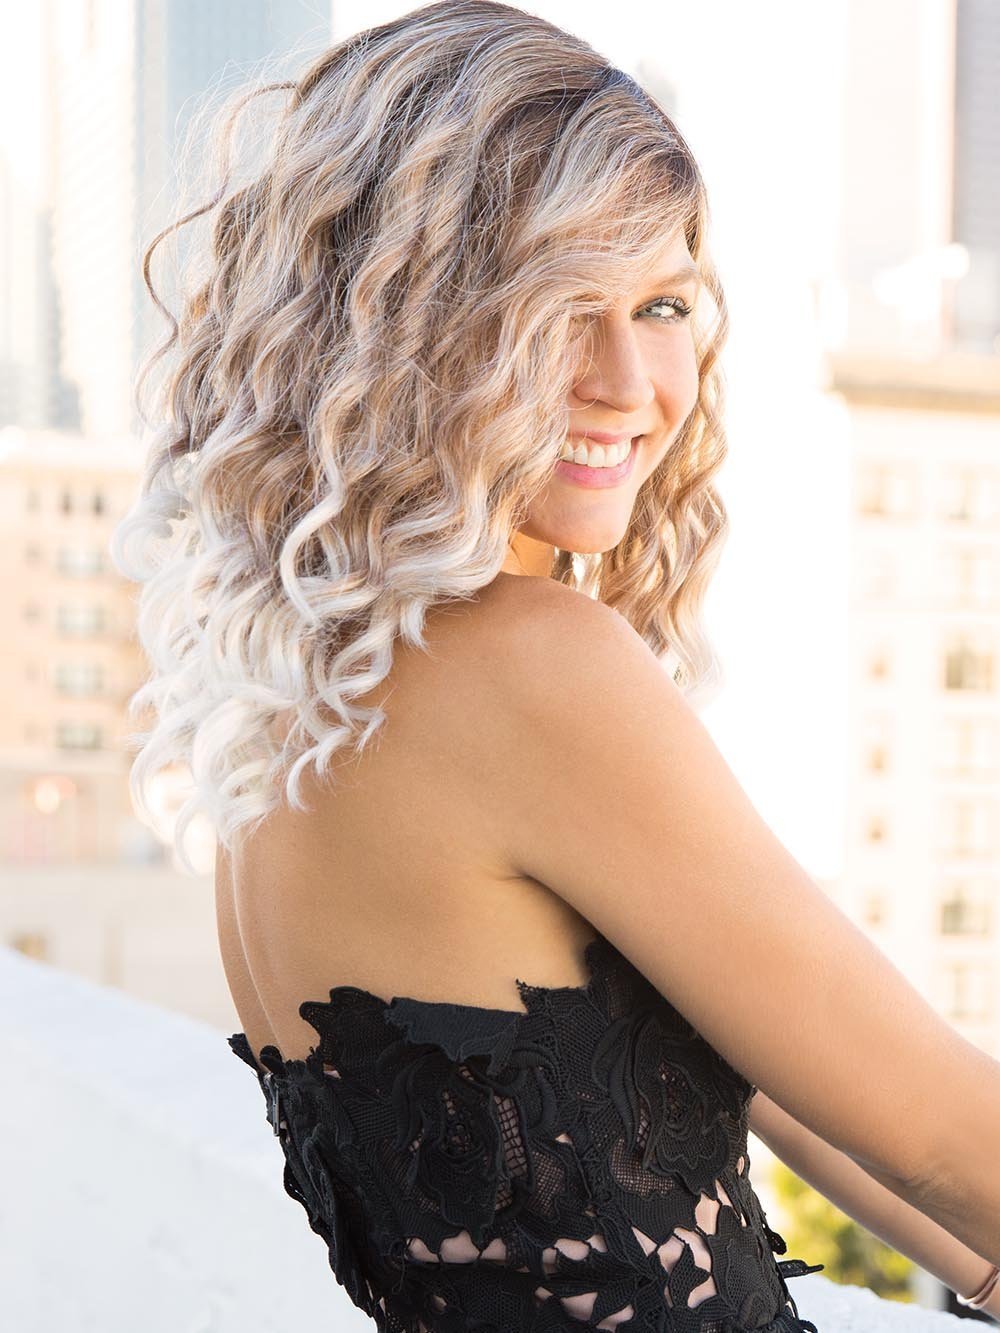 A youthful fun style that features long, playful spiral curls